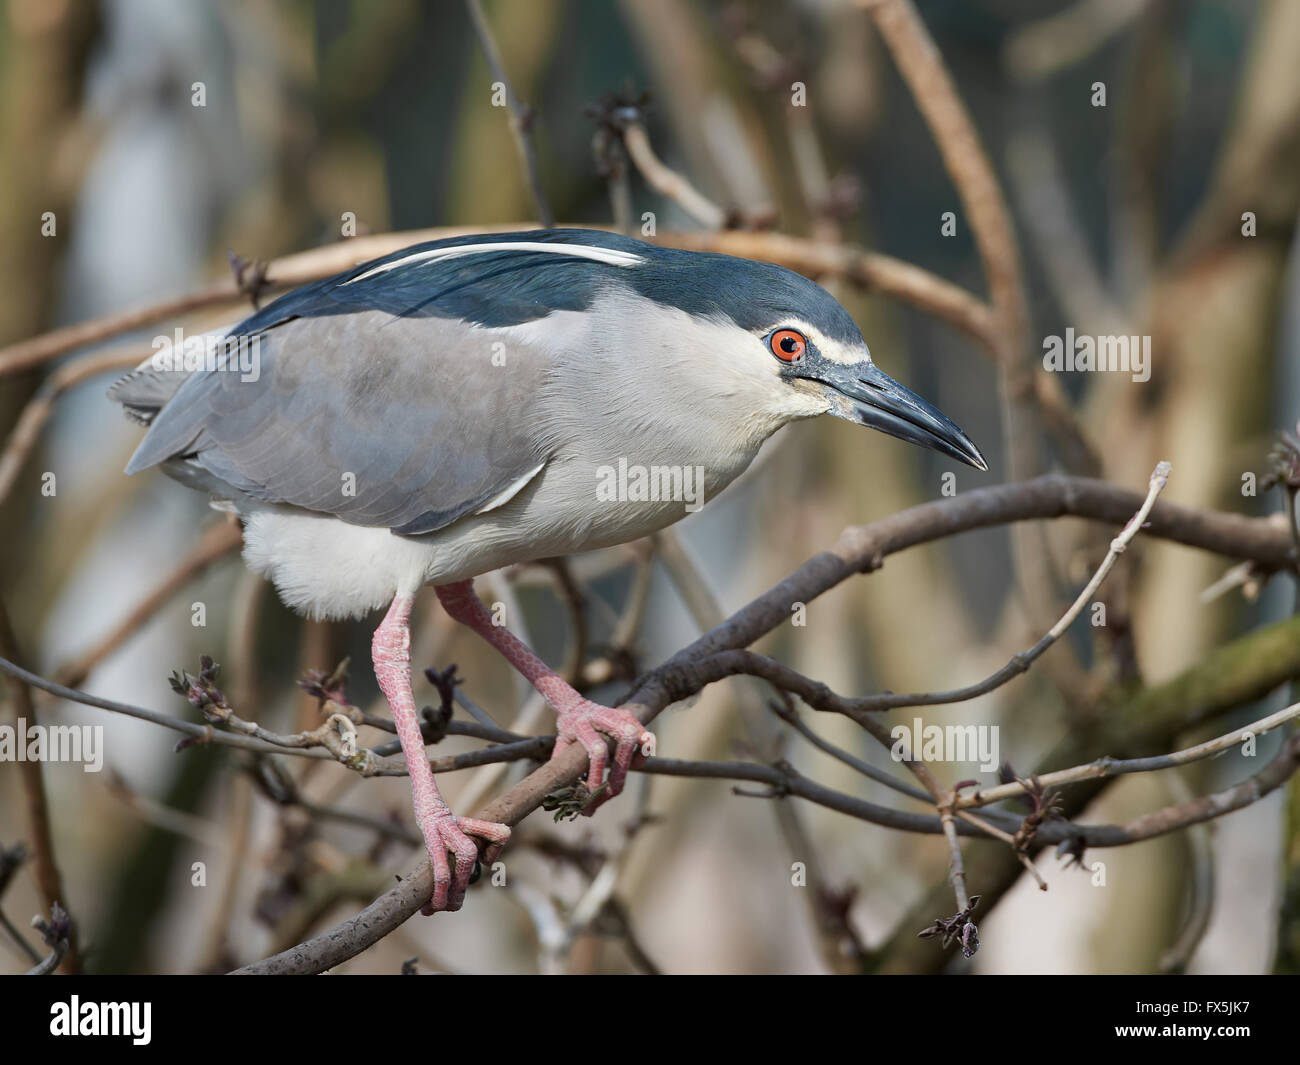 Black-crowned night heron resting on a branch in its habitat Stock Photo